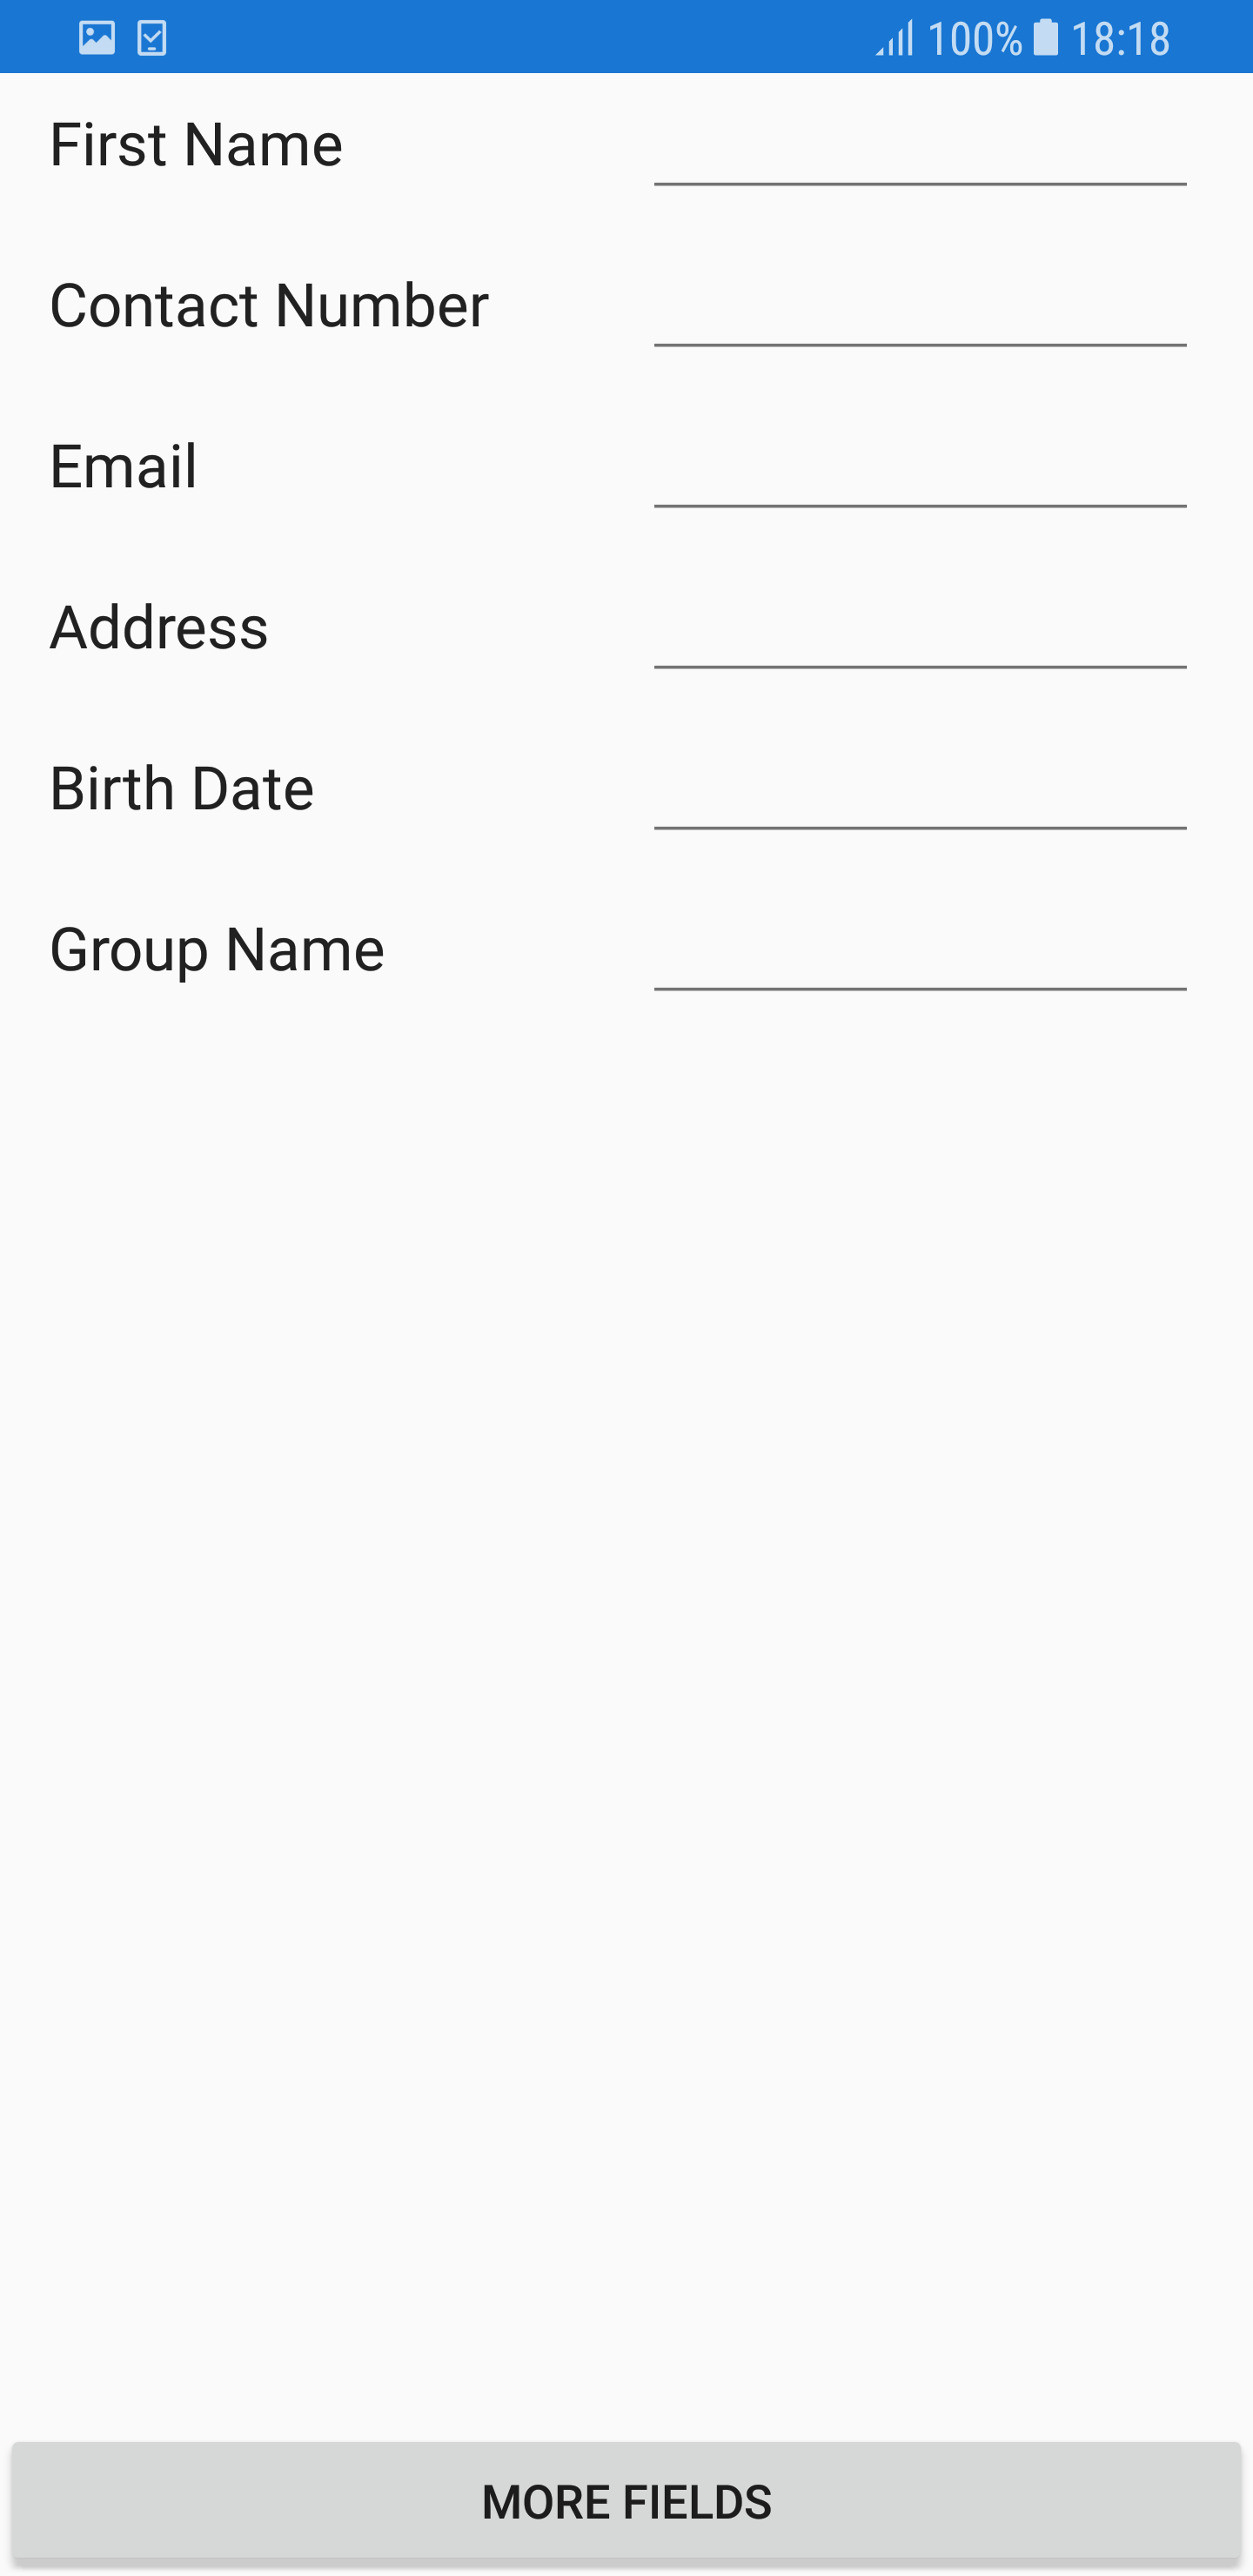 Initial rendering of data form items in Xamarin.Forms DataForm